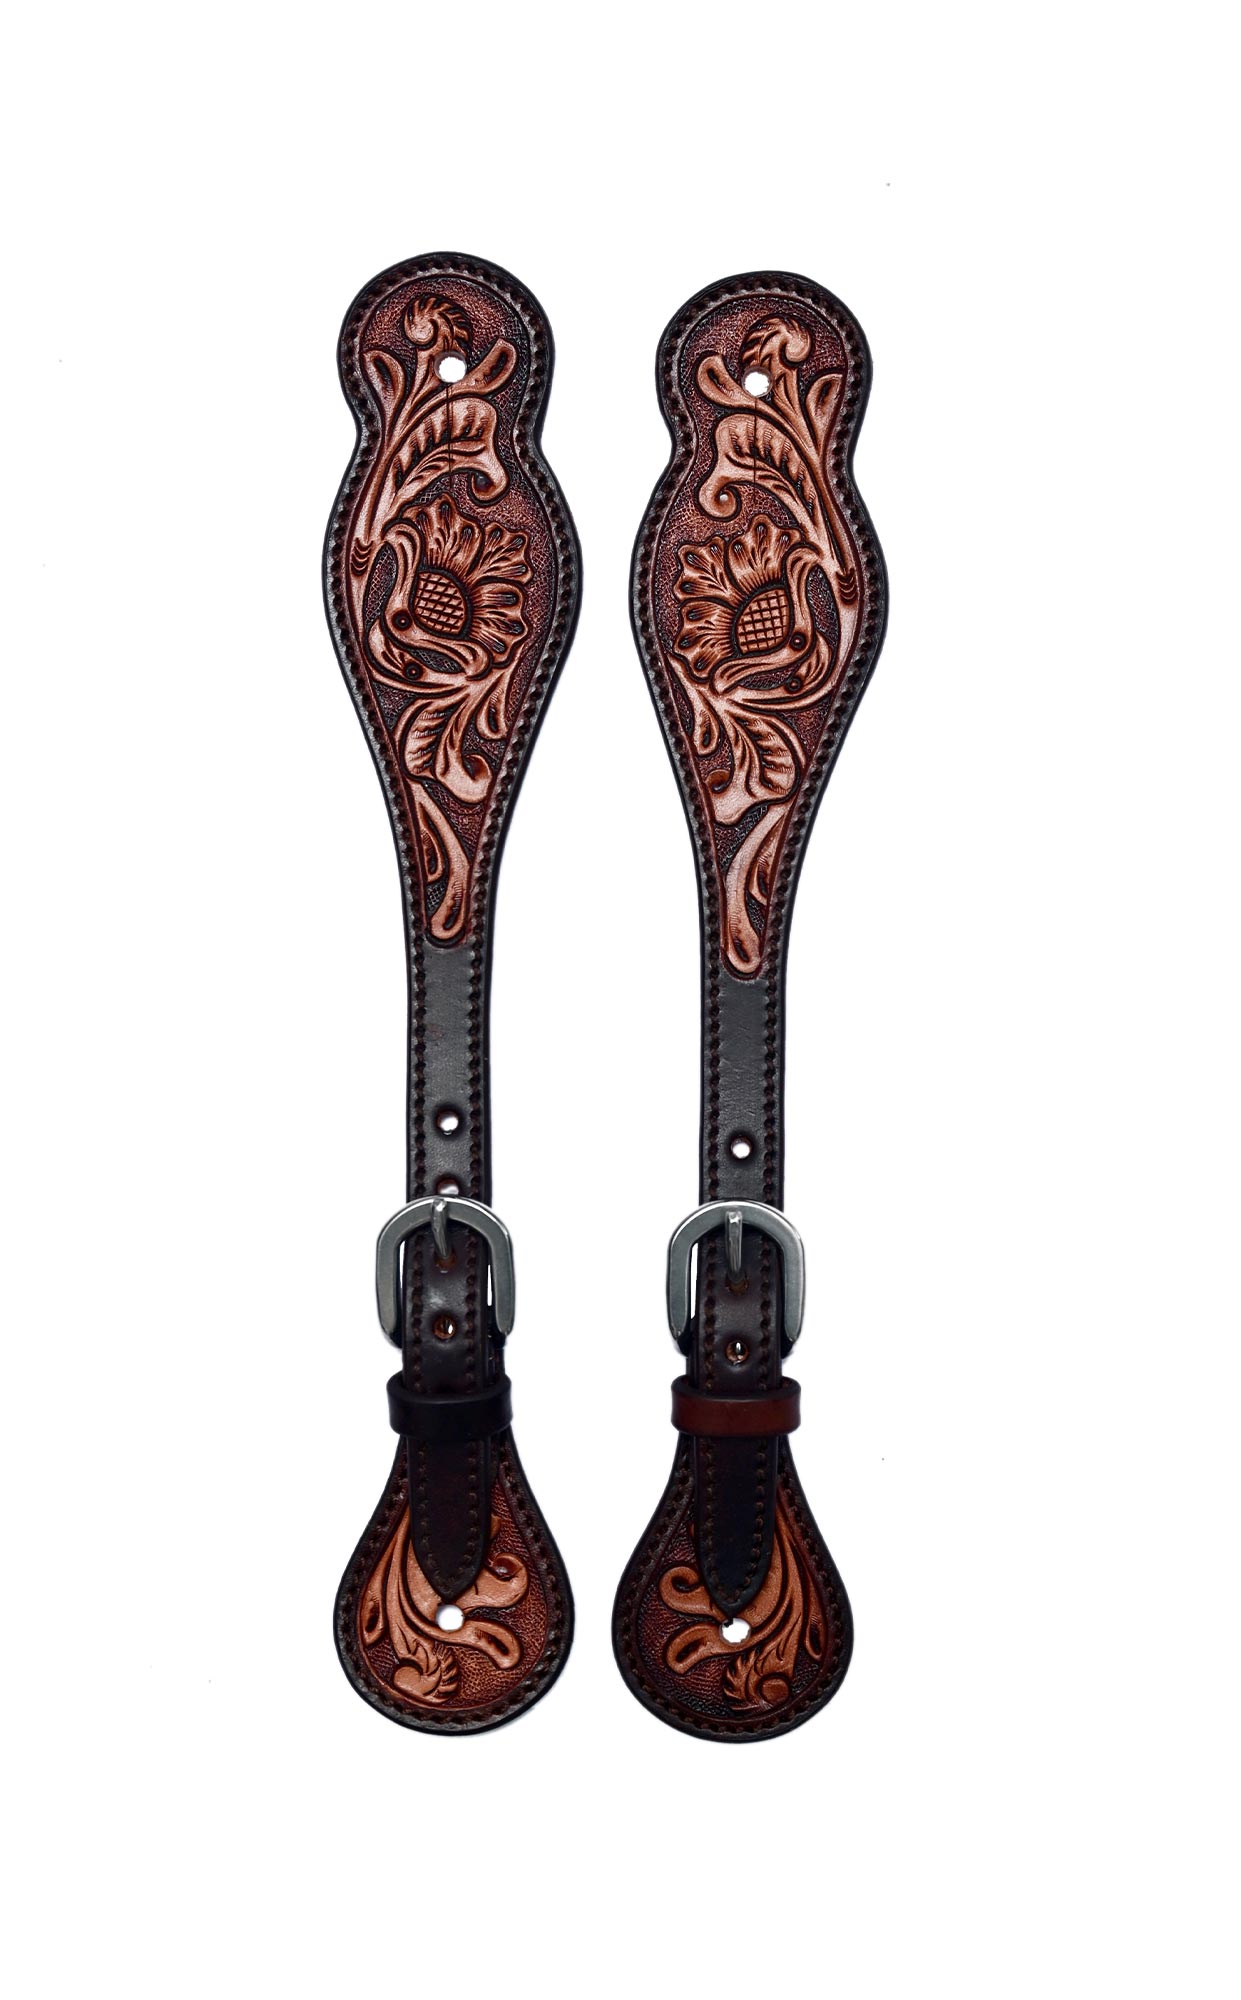 BLACK HOOF Floral Tooled |Leather Spur Straps |Two Tone for Horse Riders | Western Men, Women, Adjustable Single Ply Spur Straps | Equestrian Accessories